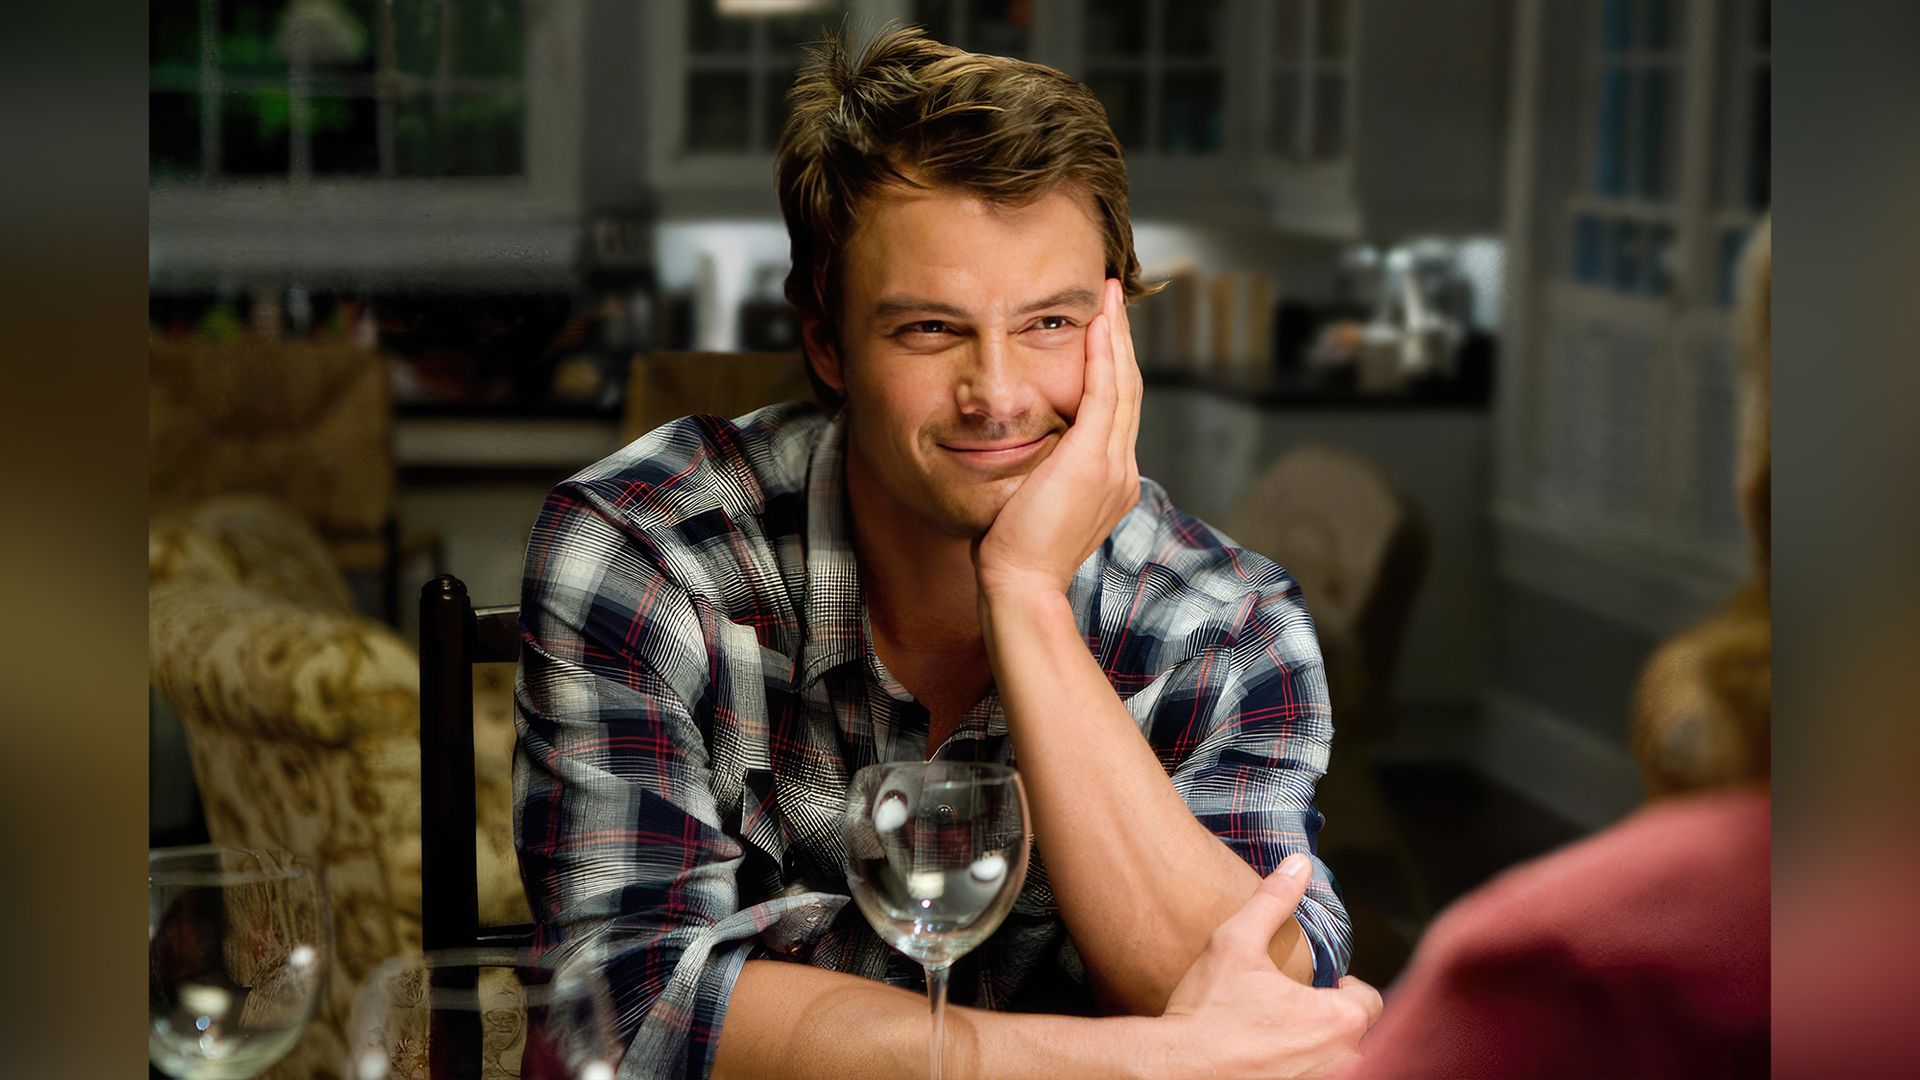 Josh Duhamel in the movie “Life as We Know It”